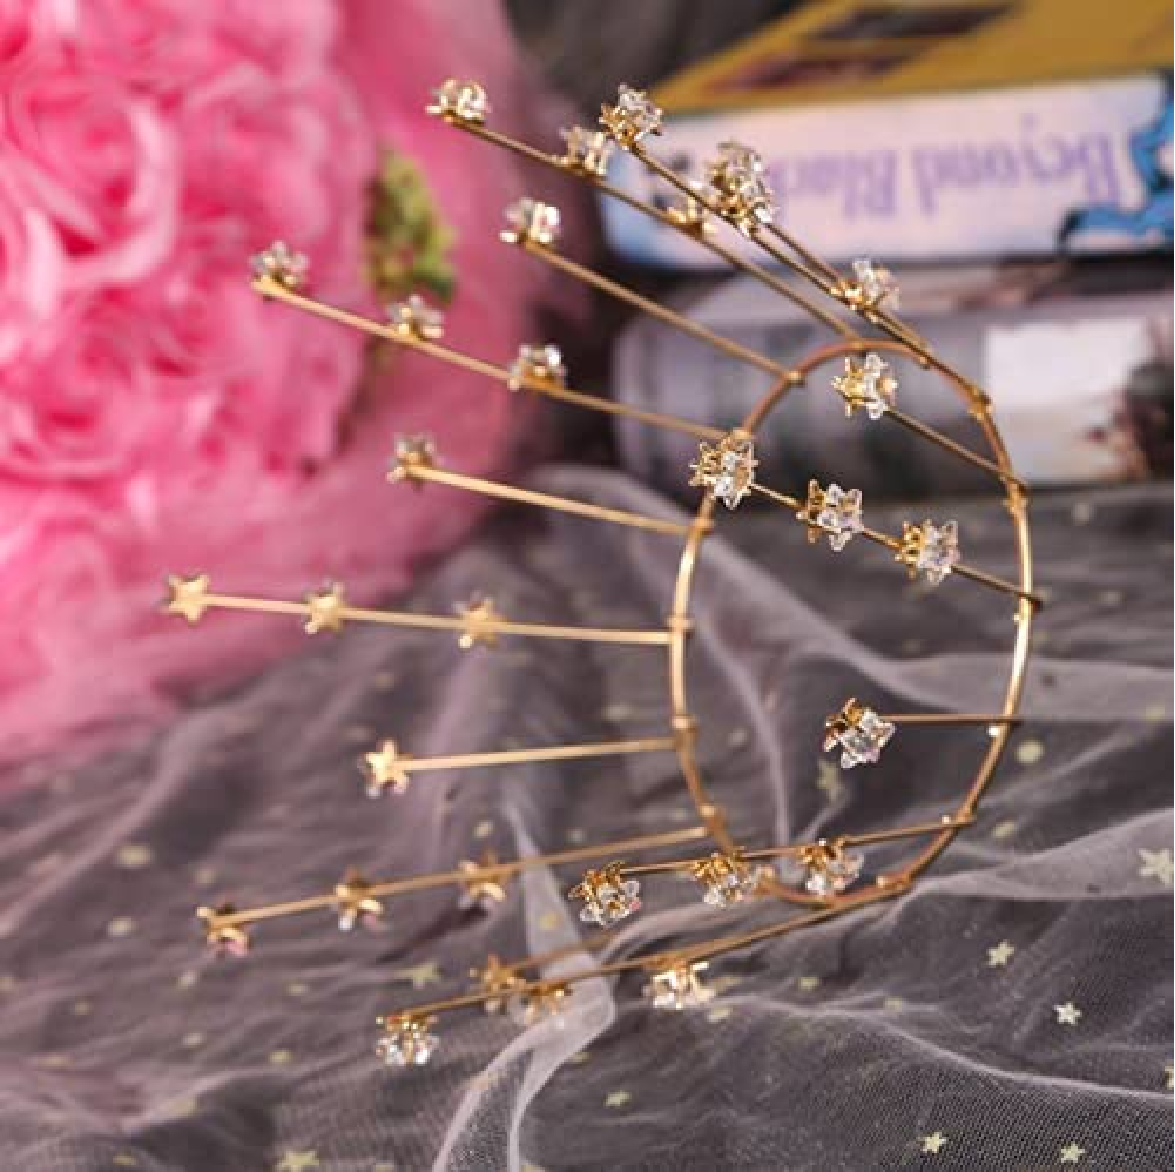 Cake Topper, Cake Decorations- Tiara 'Vintage Crown with stars' - gold - Rampant Coffee Company